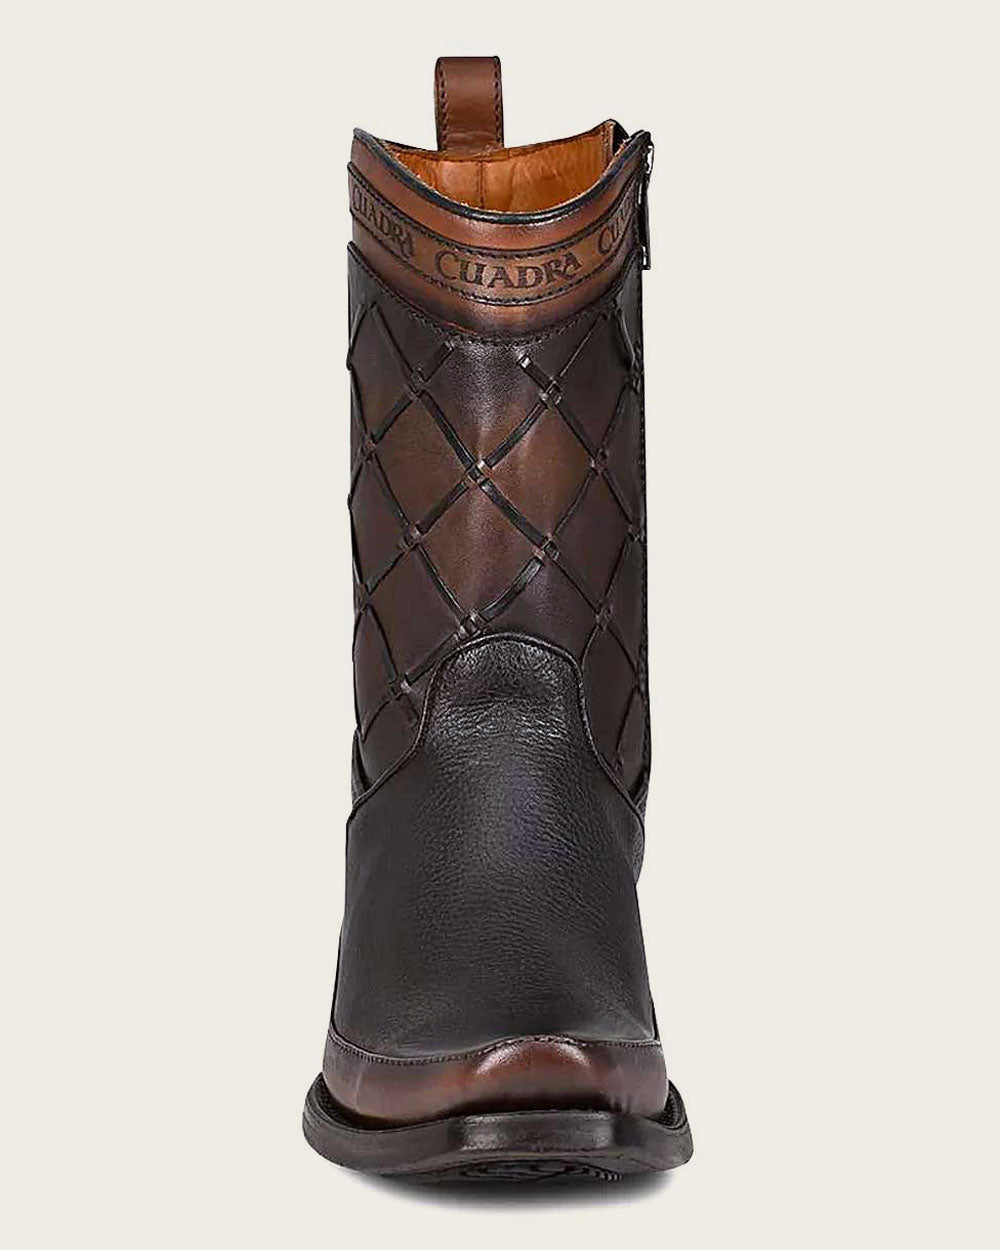 Experience Cuadra Quality: Order your Cuadra boots today and feel the difference in quality. 